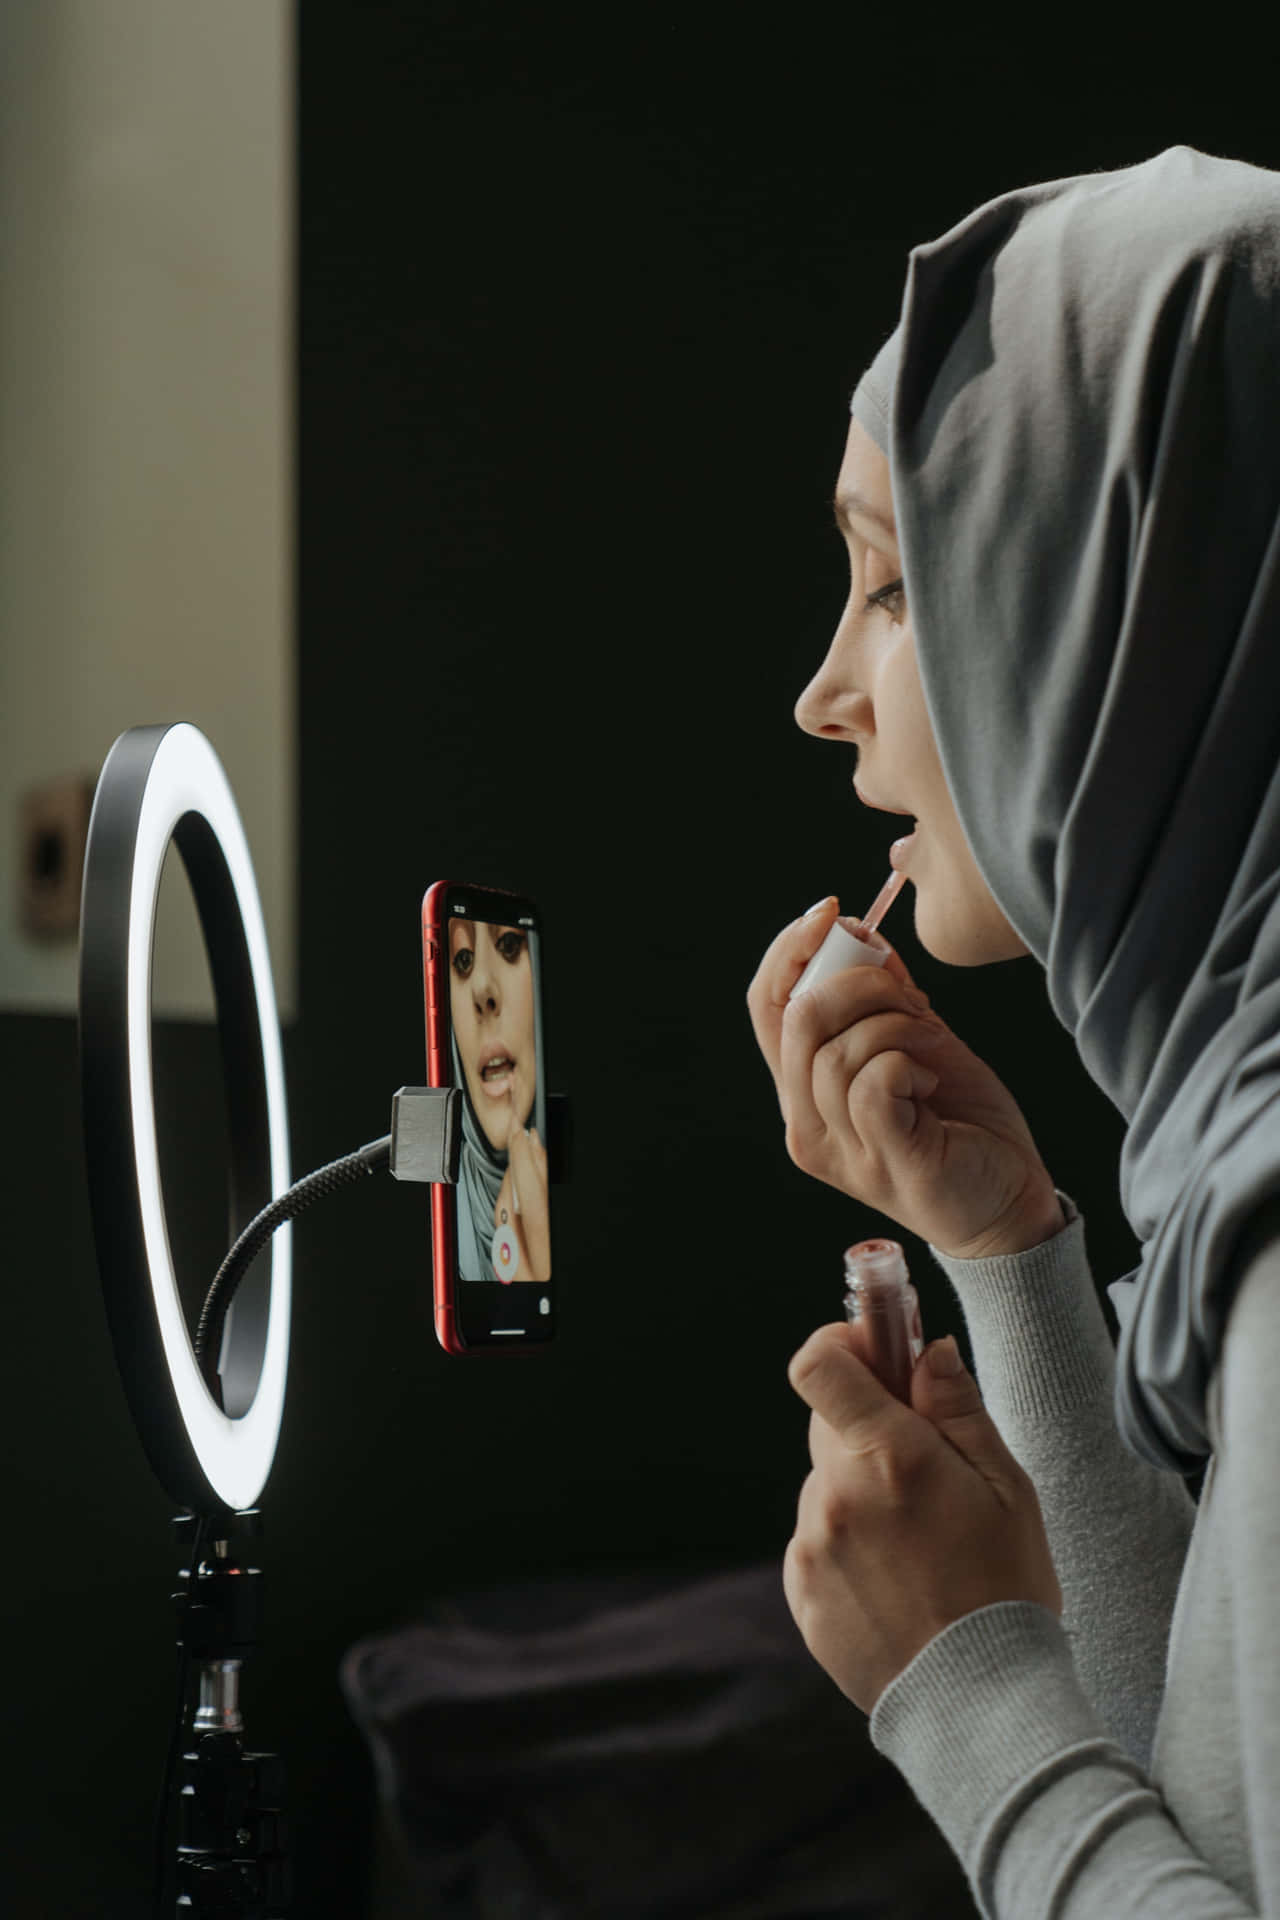 "Illuminate Your Subject With A Professional-Grade Ring Light"